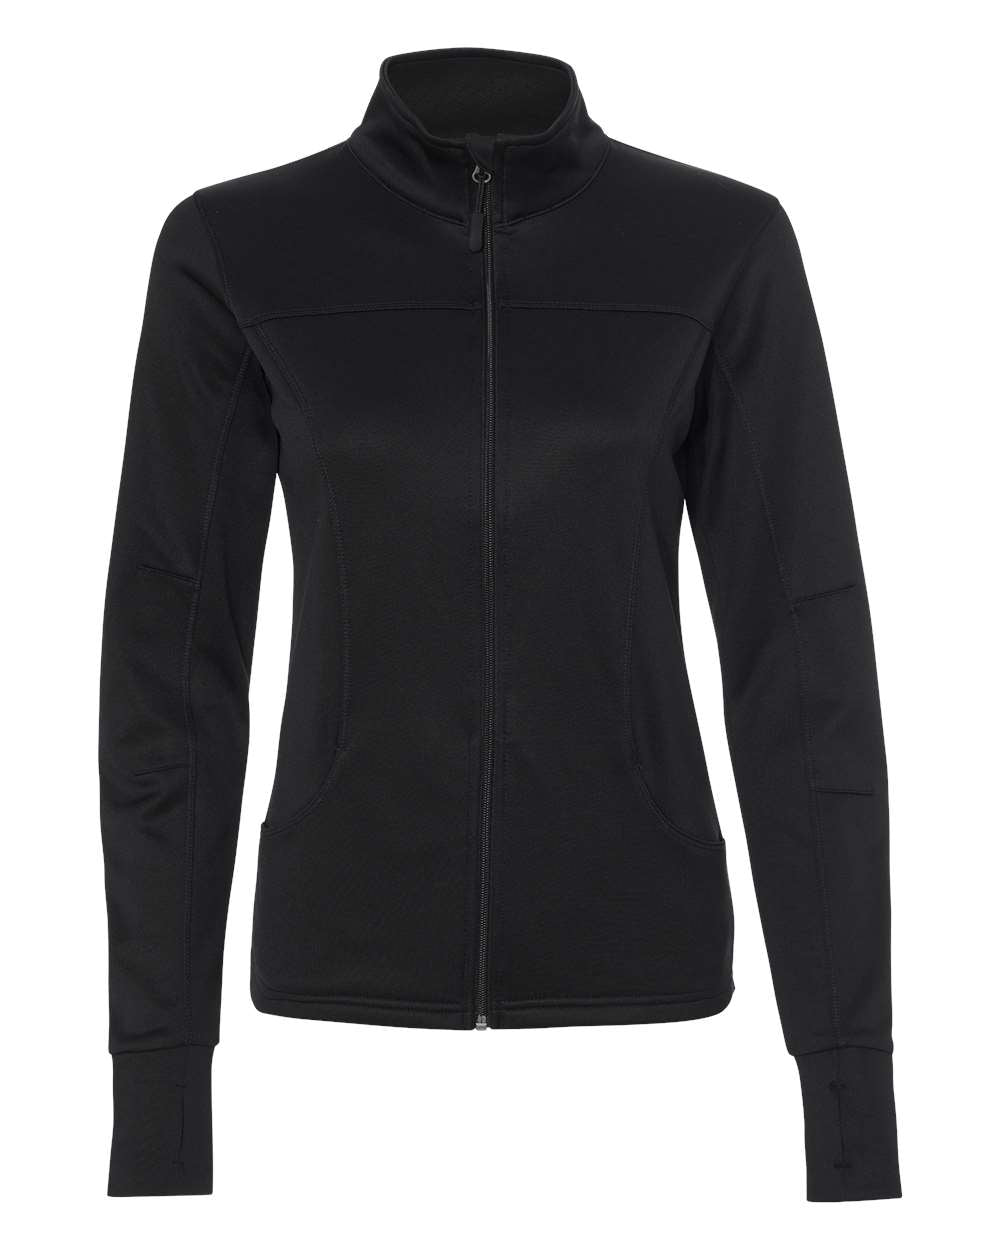 Independent Trading Co. - Women's Poly-Tech Full-Zip Track Jacket